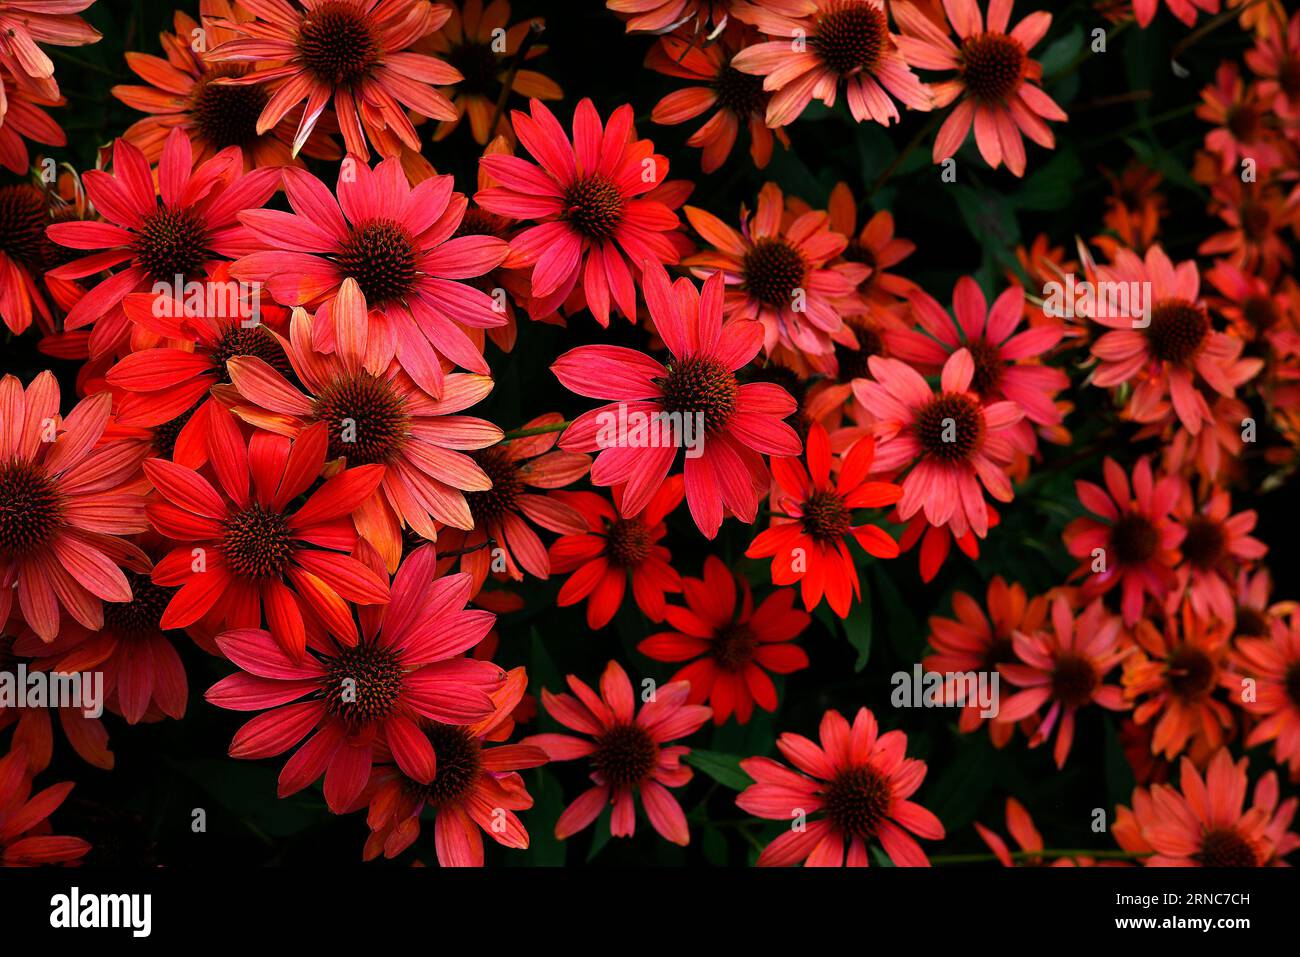 Closeup of the orange florets and orange-brown central cones of the summer flowering low-growing herbaceous perennial garden plant Echinacea sombrero. Stock Photo